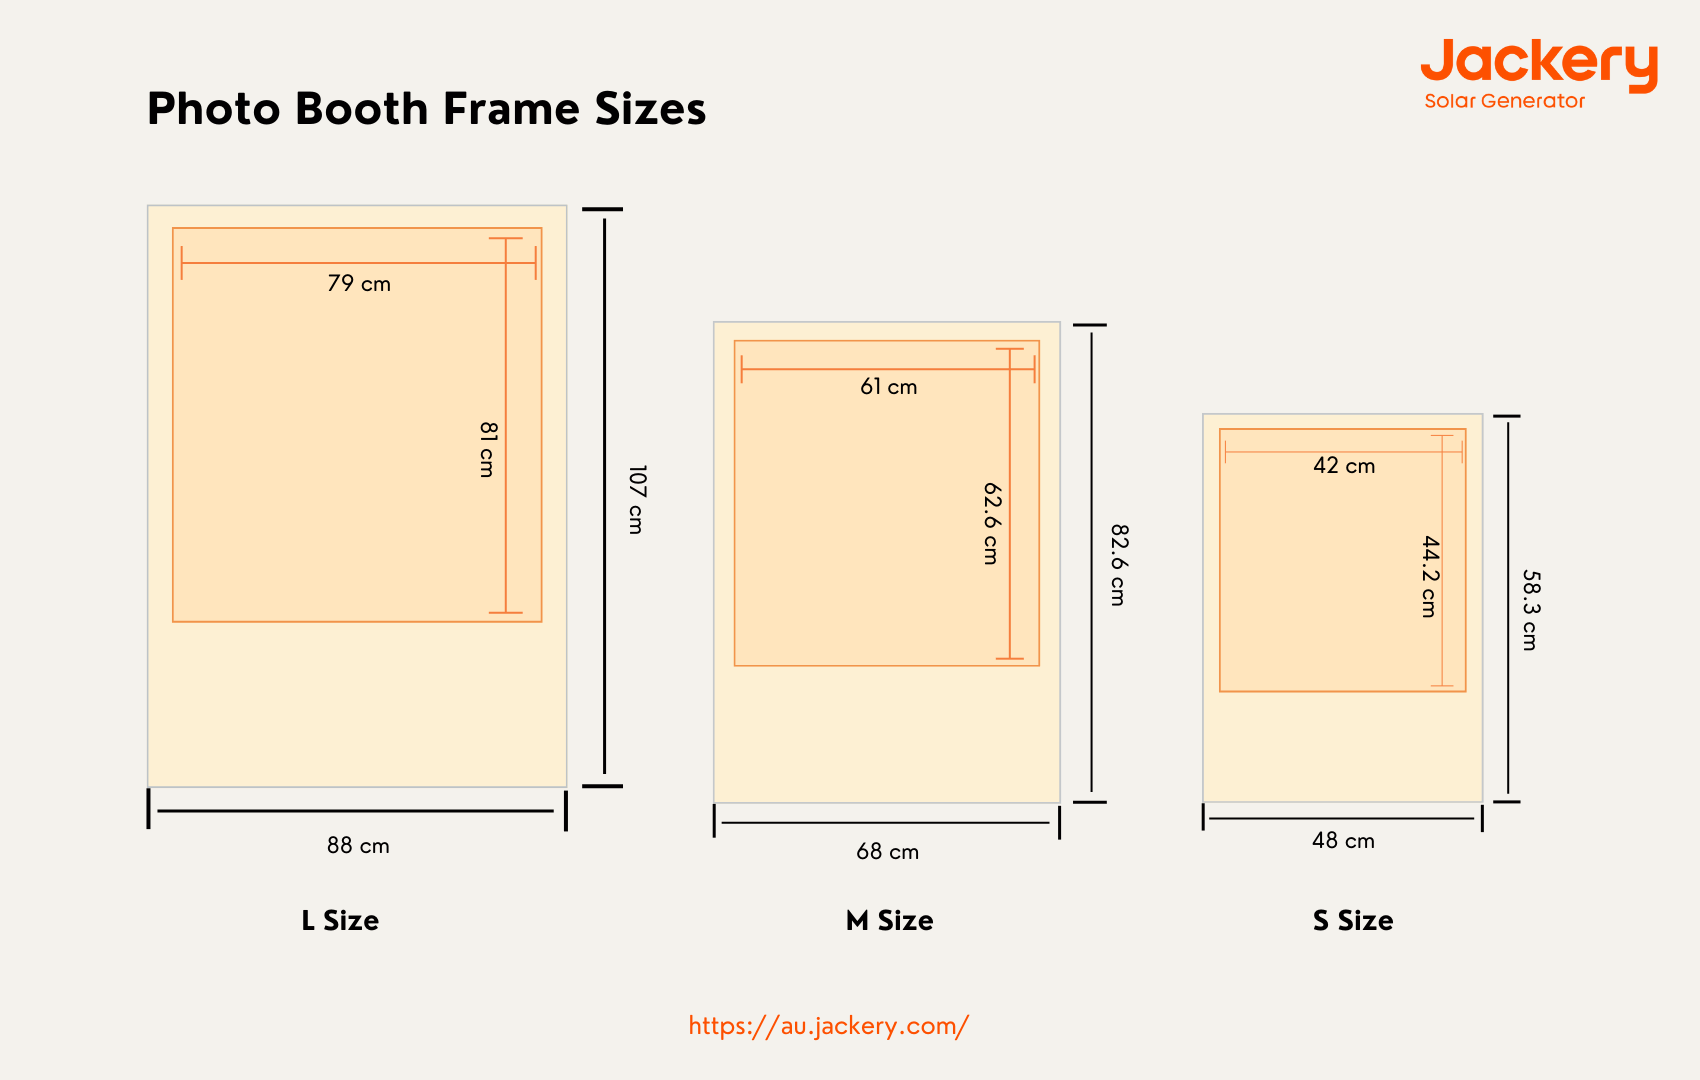 photo booth frame sizes